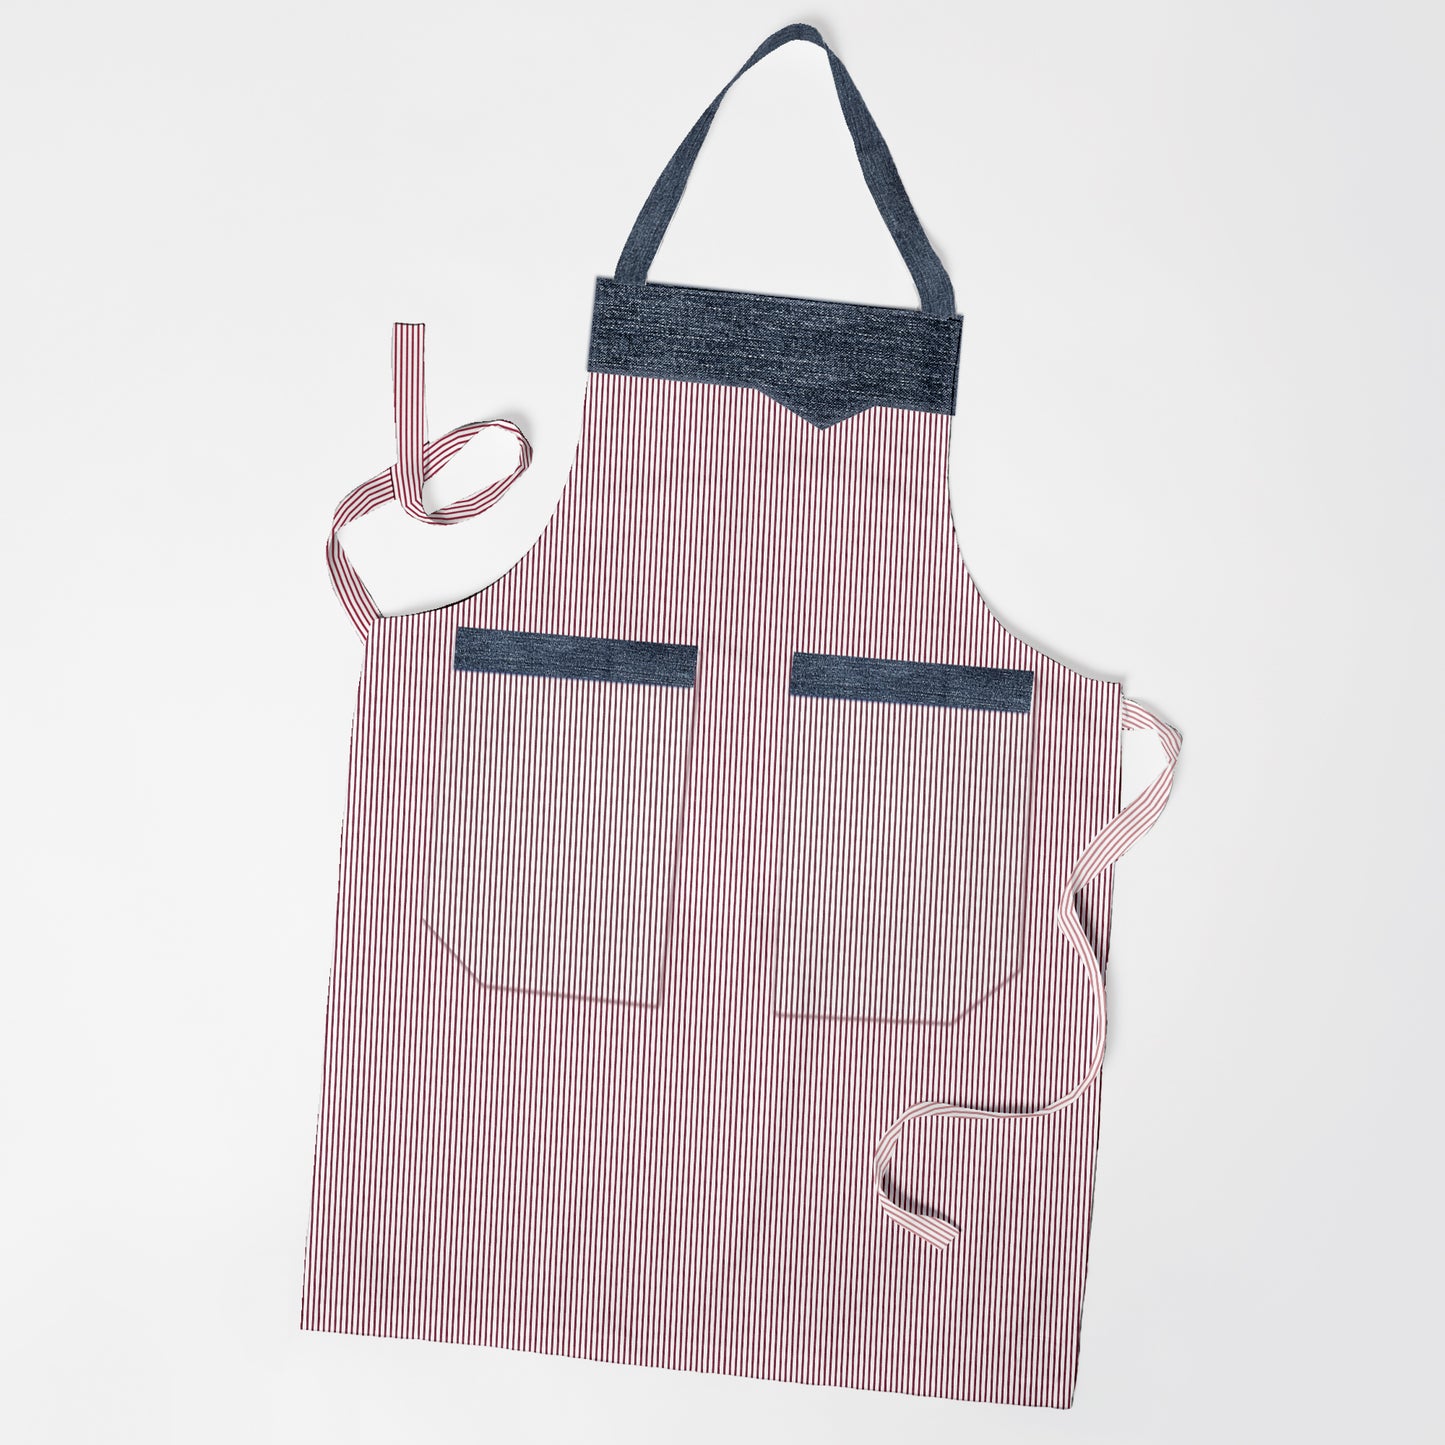 Chef Bib Apron Dress with Double Pocket for Professional Cooking~1204